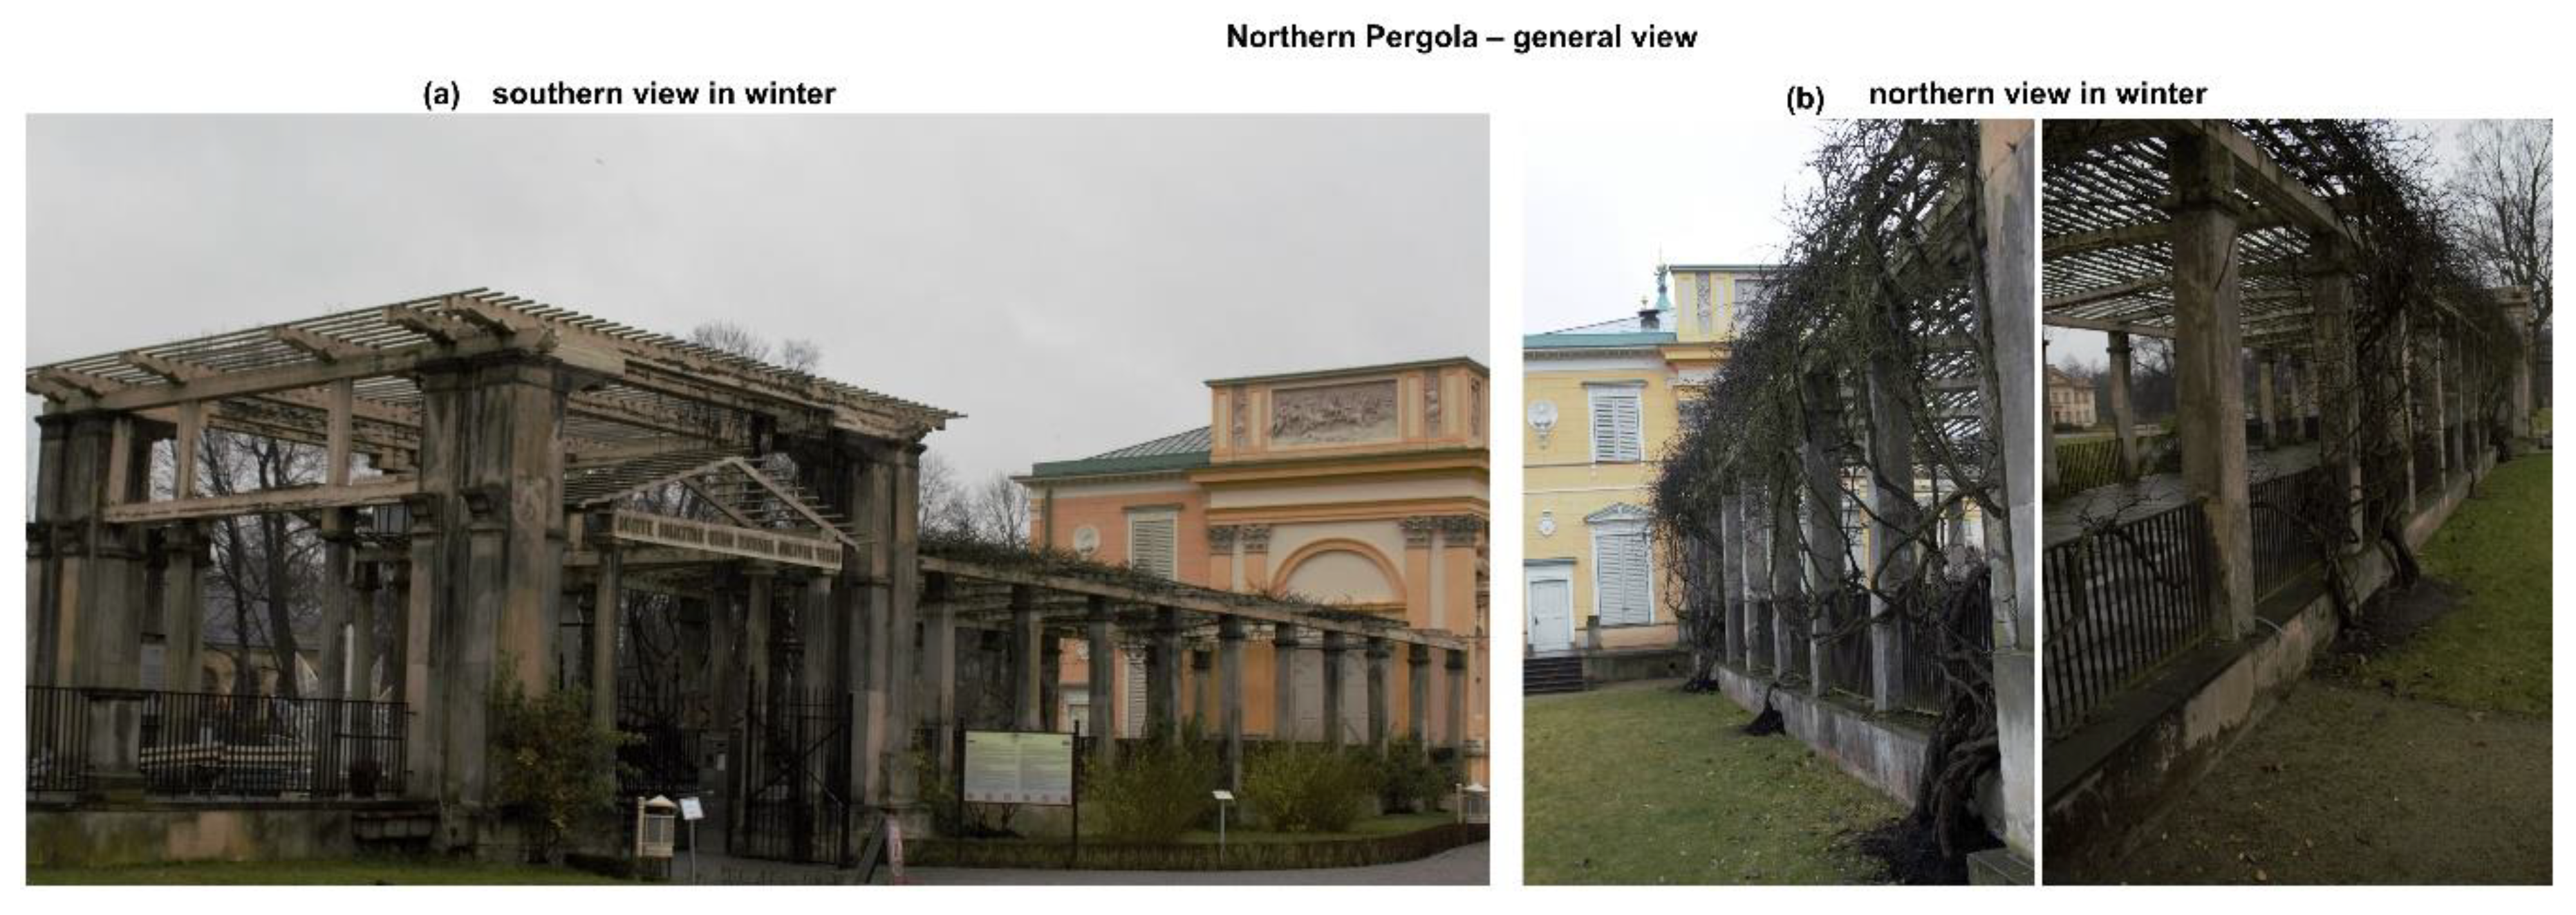 Applied Sciences | Free Full-Text | Diversity of Biodeteriorative Bacterial  and Fungal Consortia in Winter and Summer on Historical Sandstone of the  Northern Pergola, Museum of King John III's Palace at Wilanow,